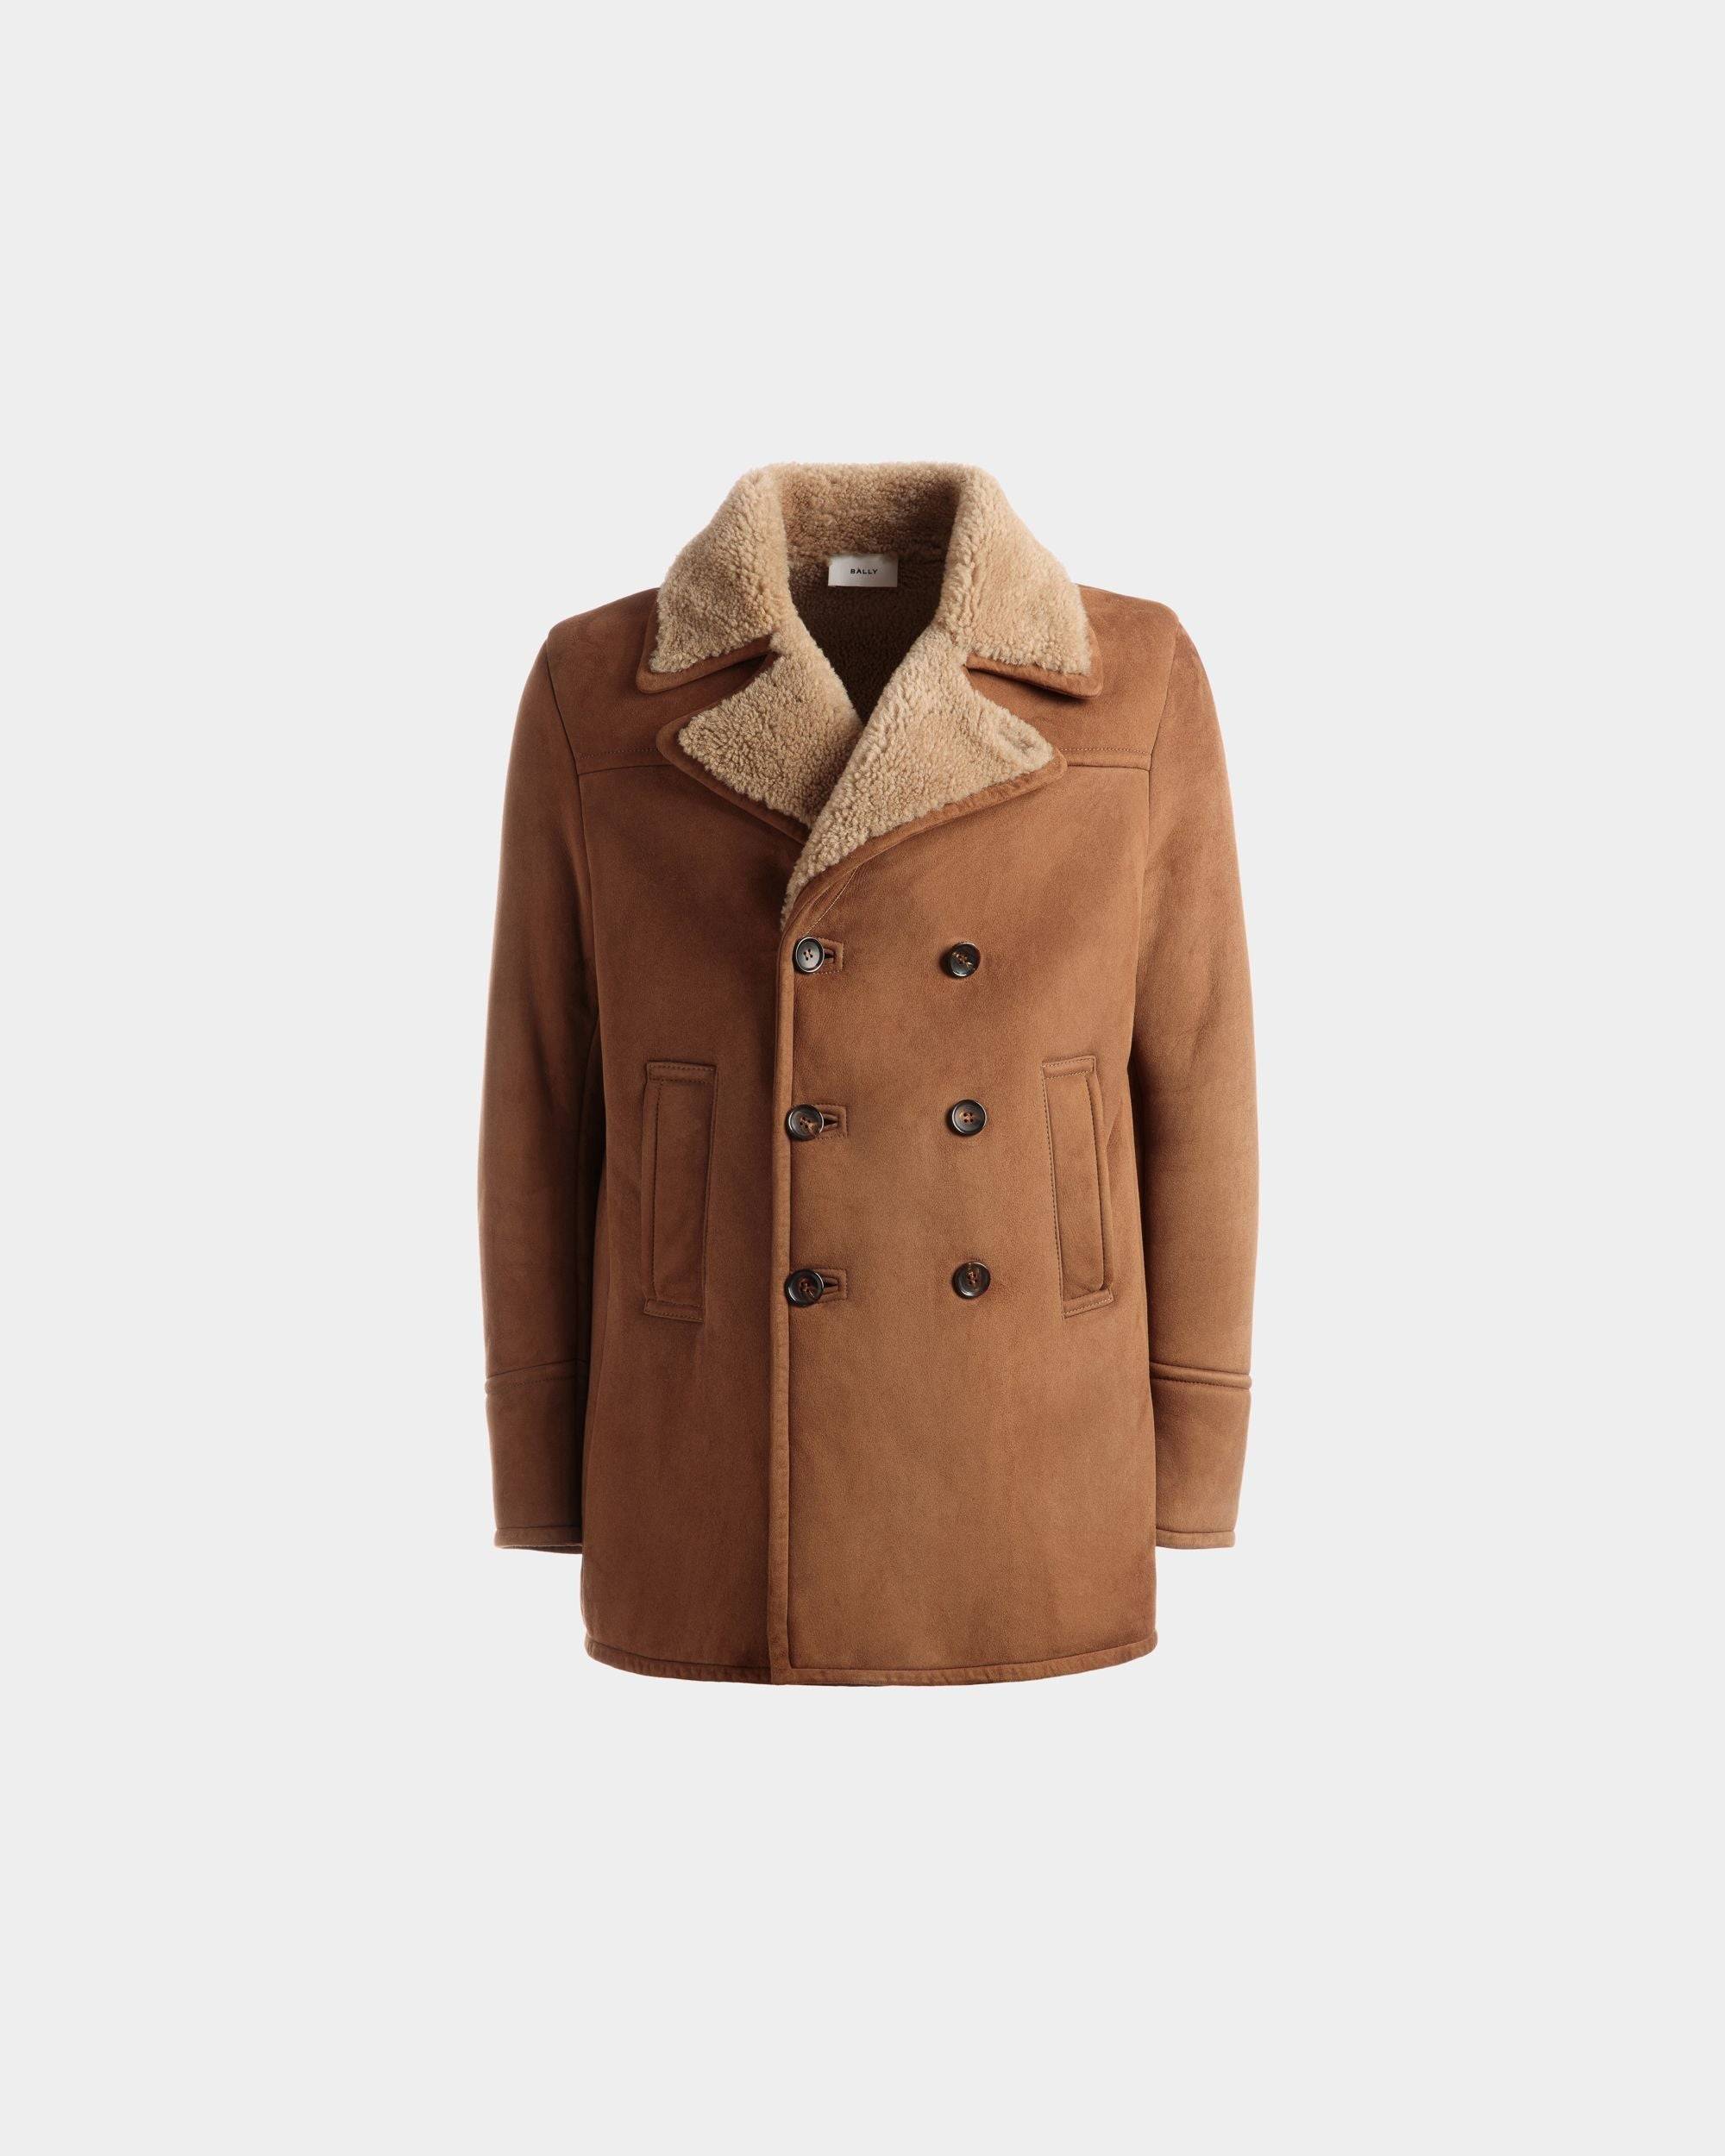 Double Breasted Shearling Coat | Men's Outerwear | Brown Suede | Bally | Still Life Front